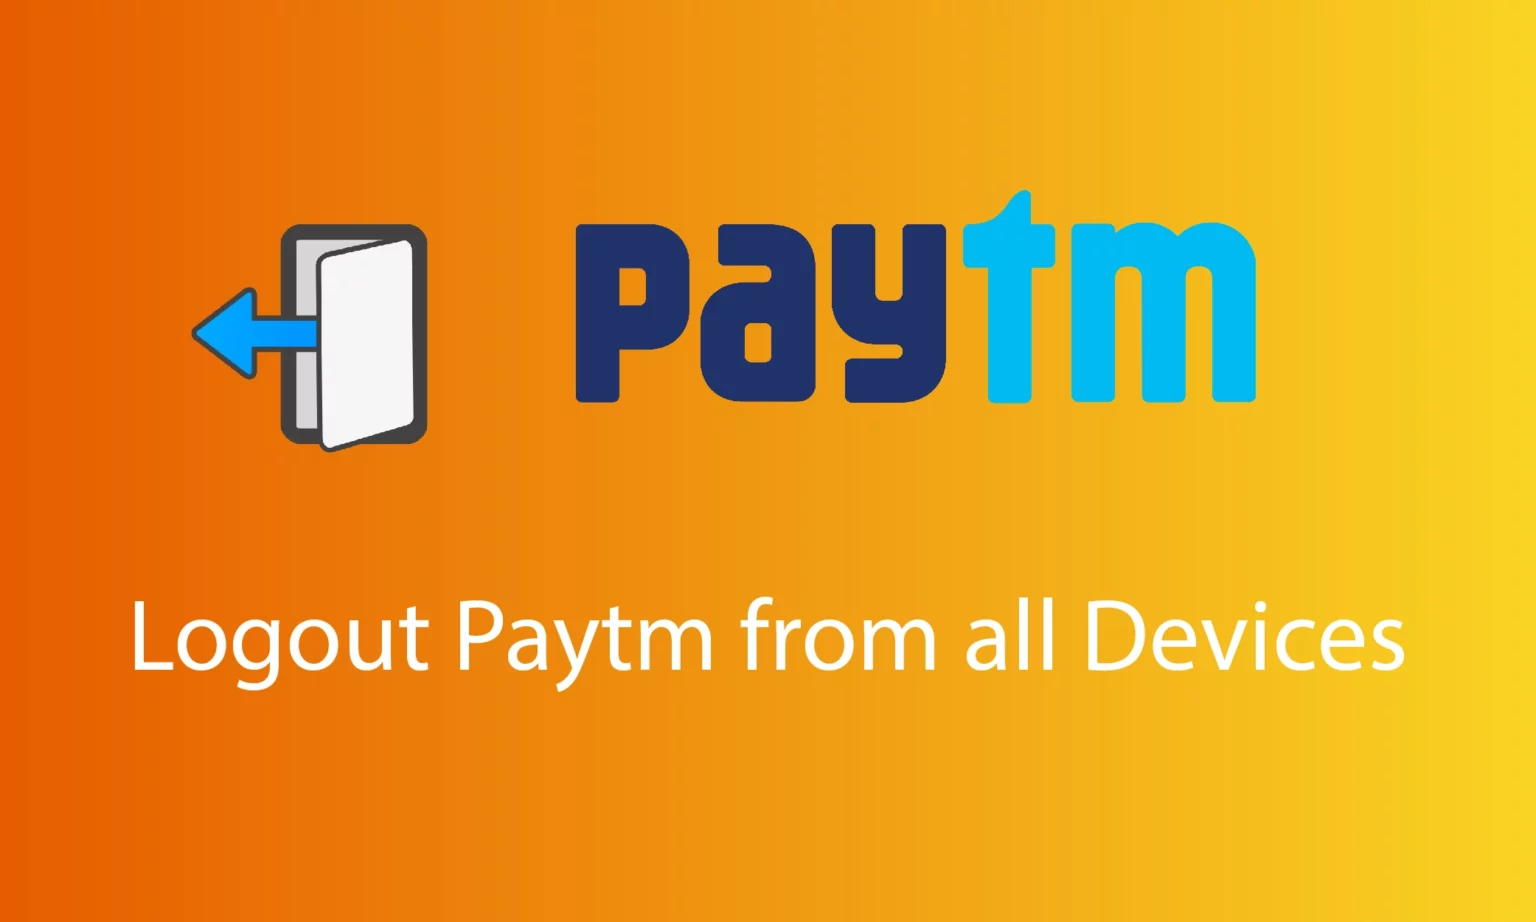 How to Logout Paytm From All Devices